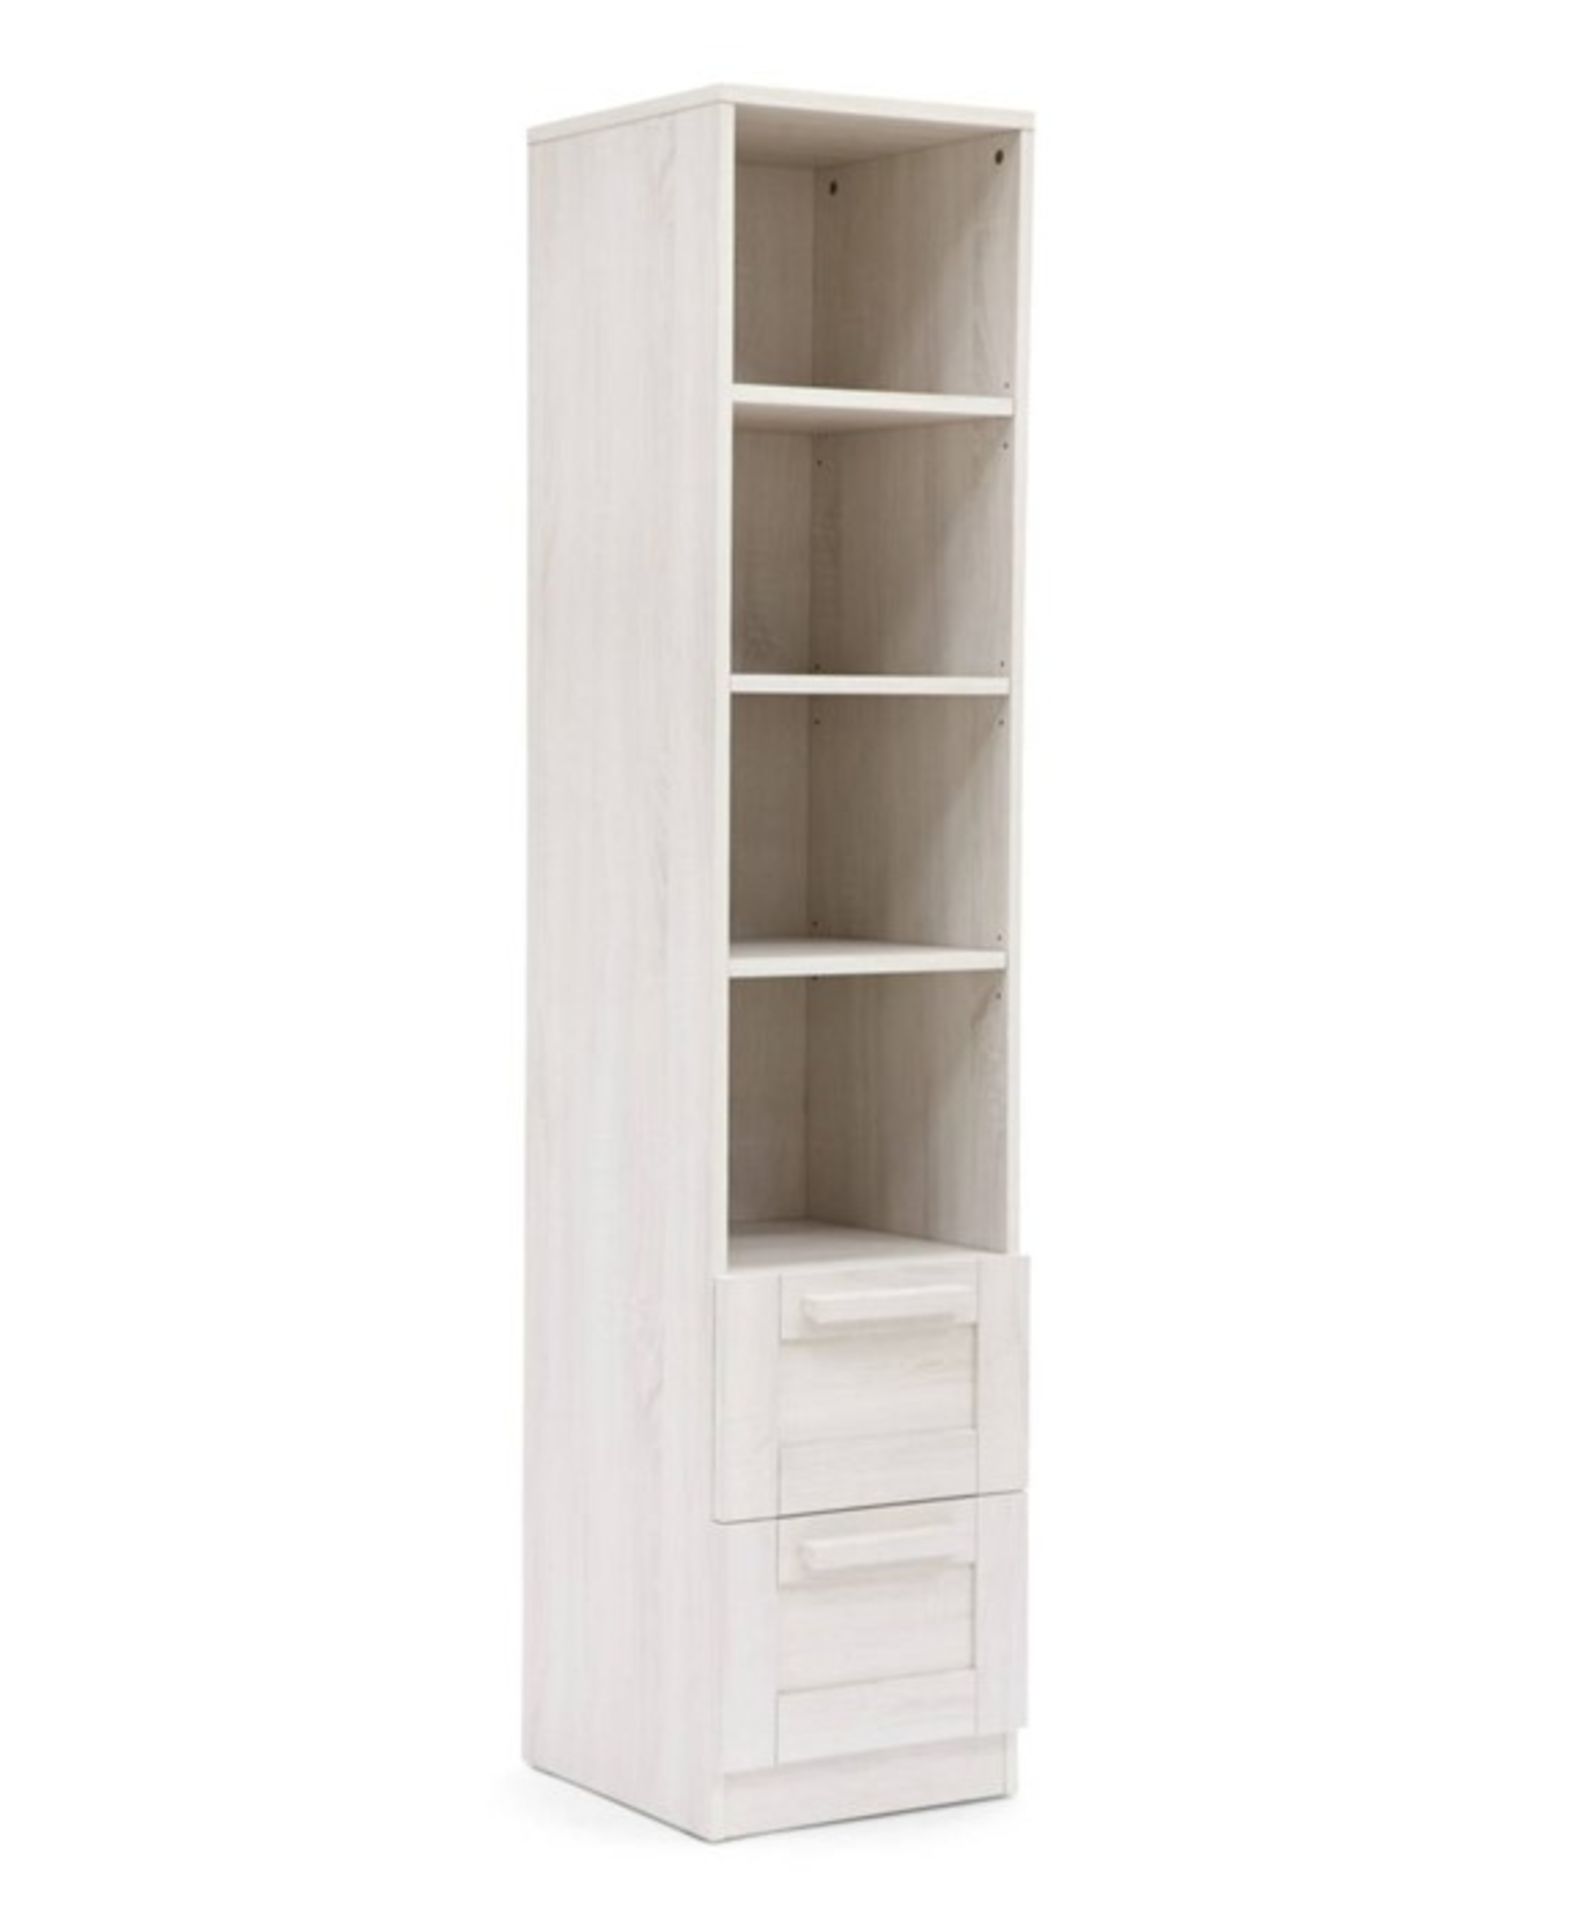 1 BOXED MAMAS AND PAPAS ATLAS BOOKCASE IN NIMBUS WHITE / RRP £179.00 (VIEWING HIGHLY RECOMMENDED)